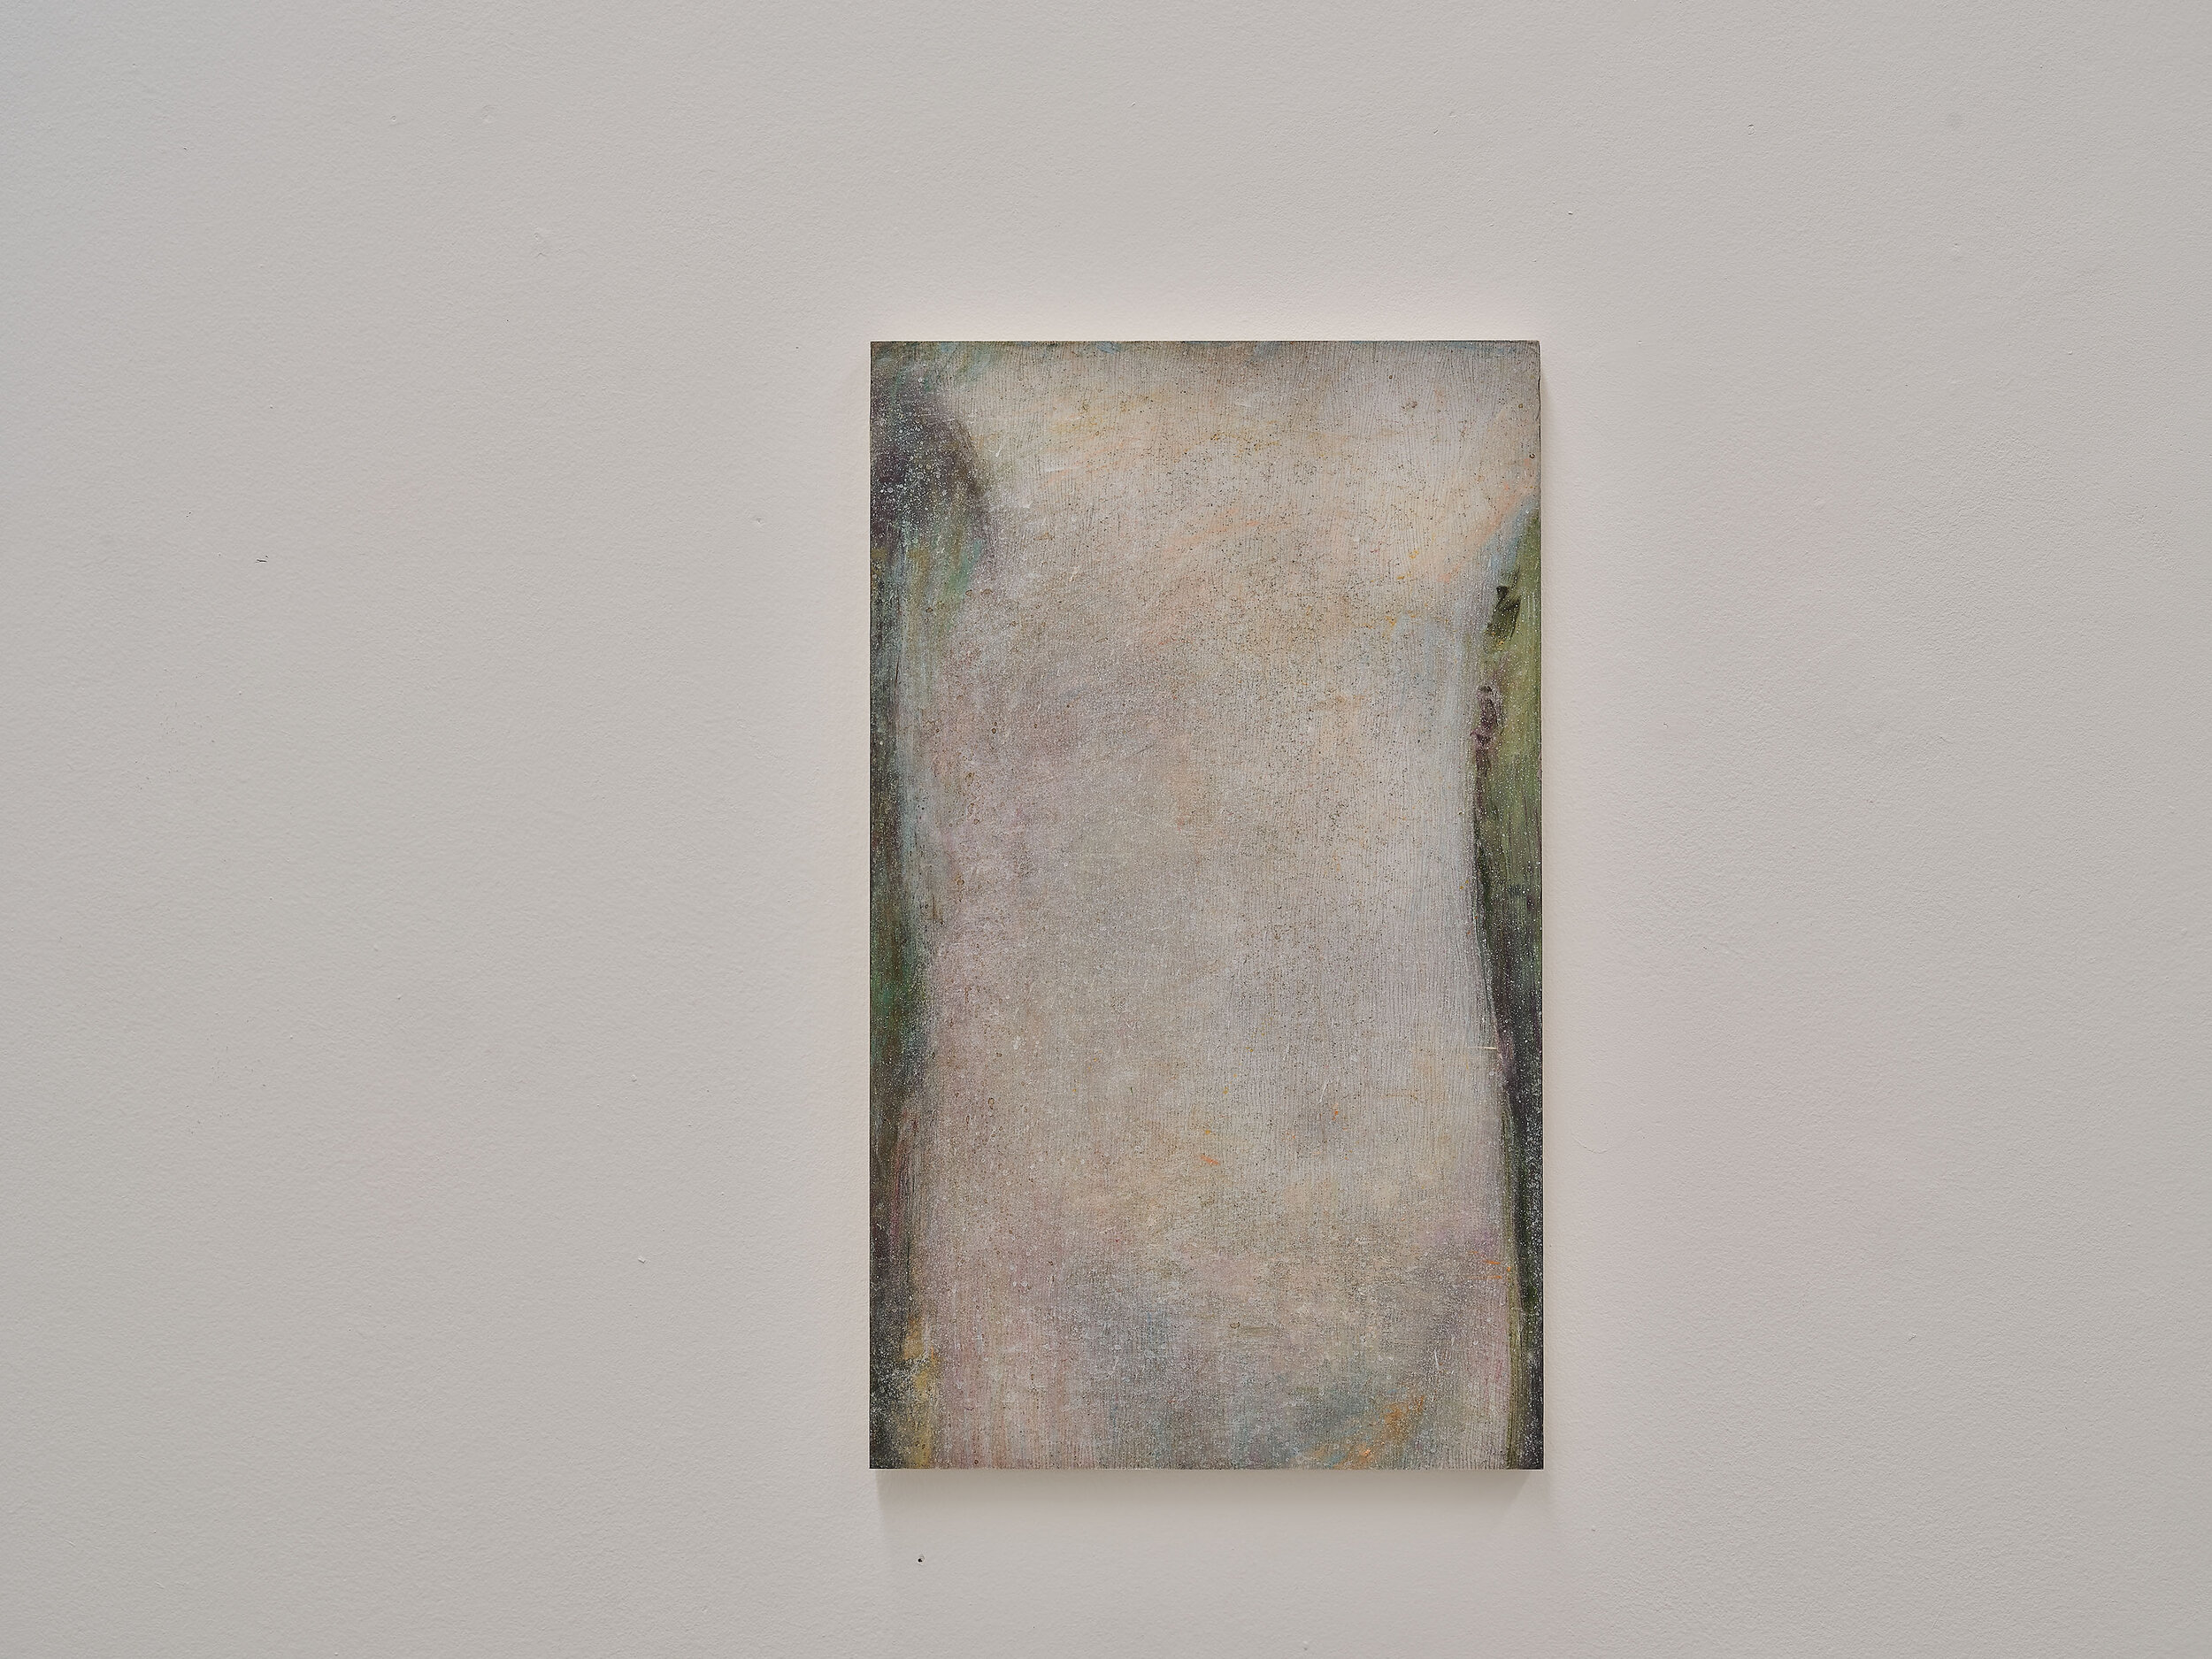  Robert Bosisio untitled, 2014/15/20 Oil and mixed media on canvas 60 x 35.50 cm 